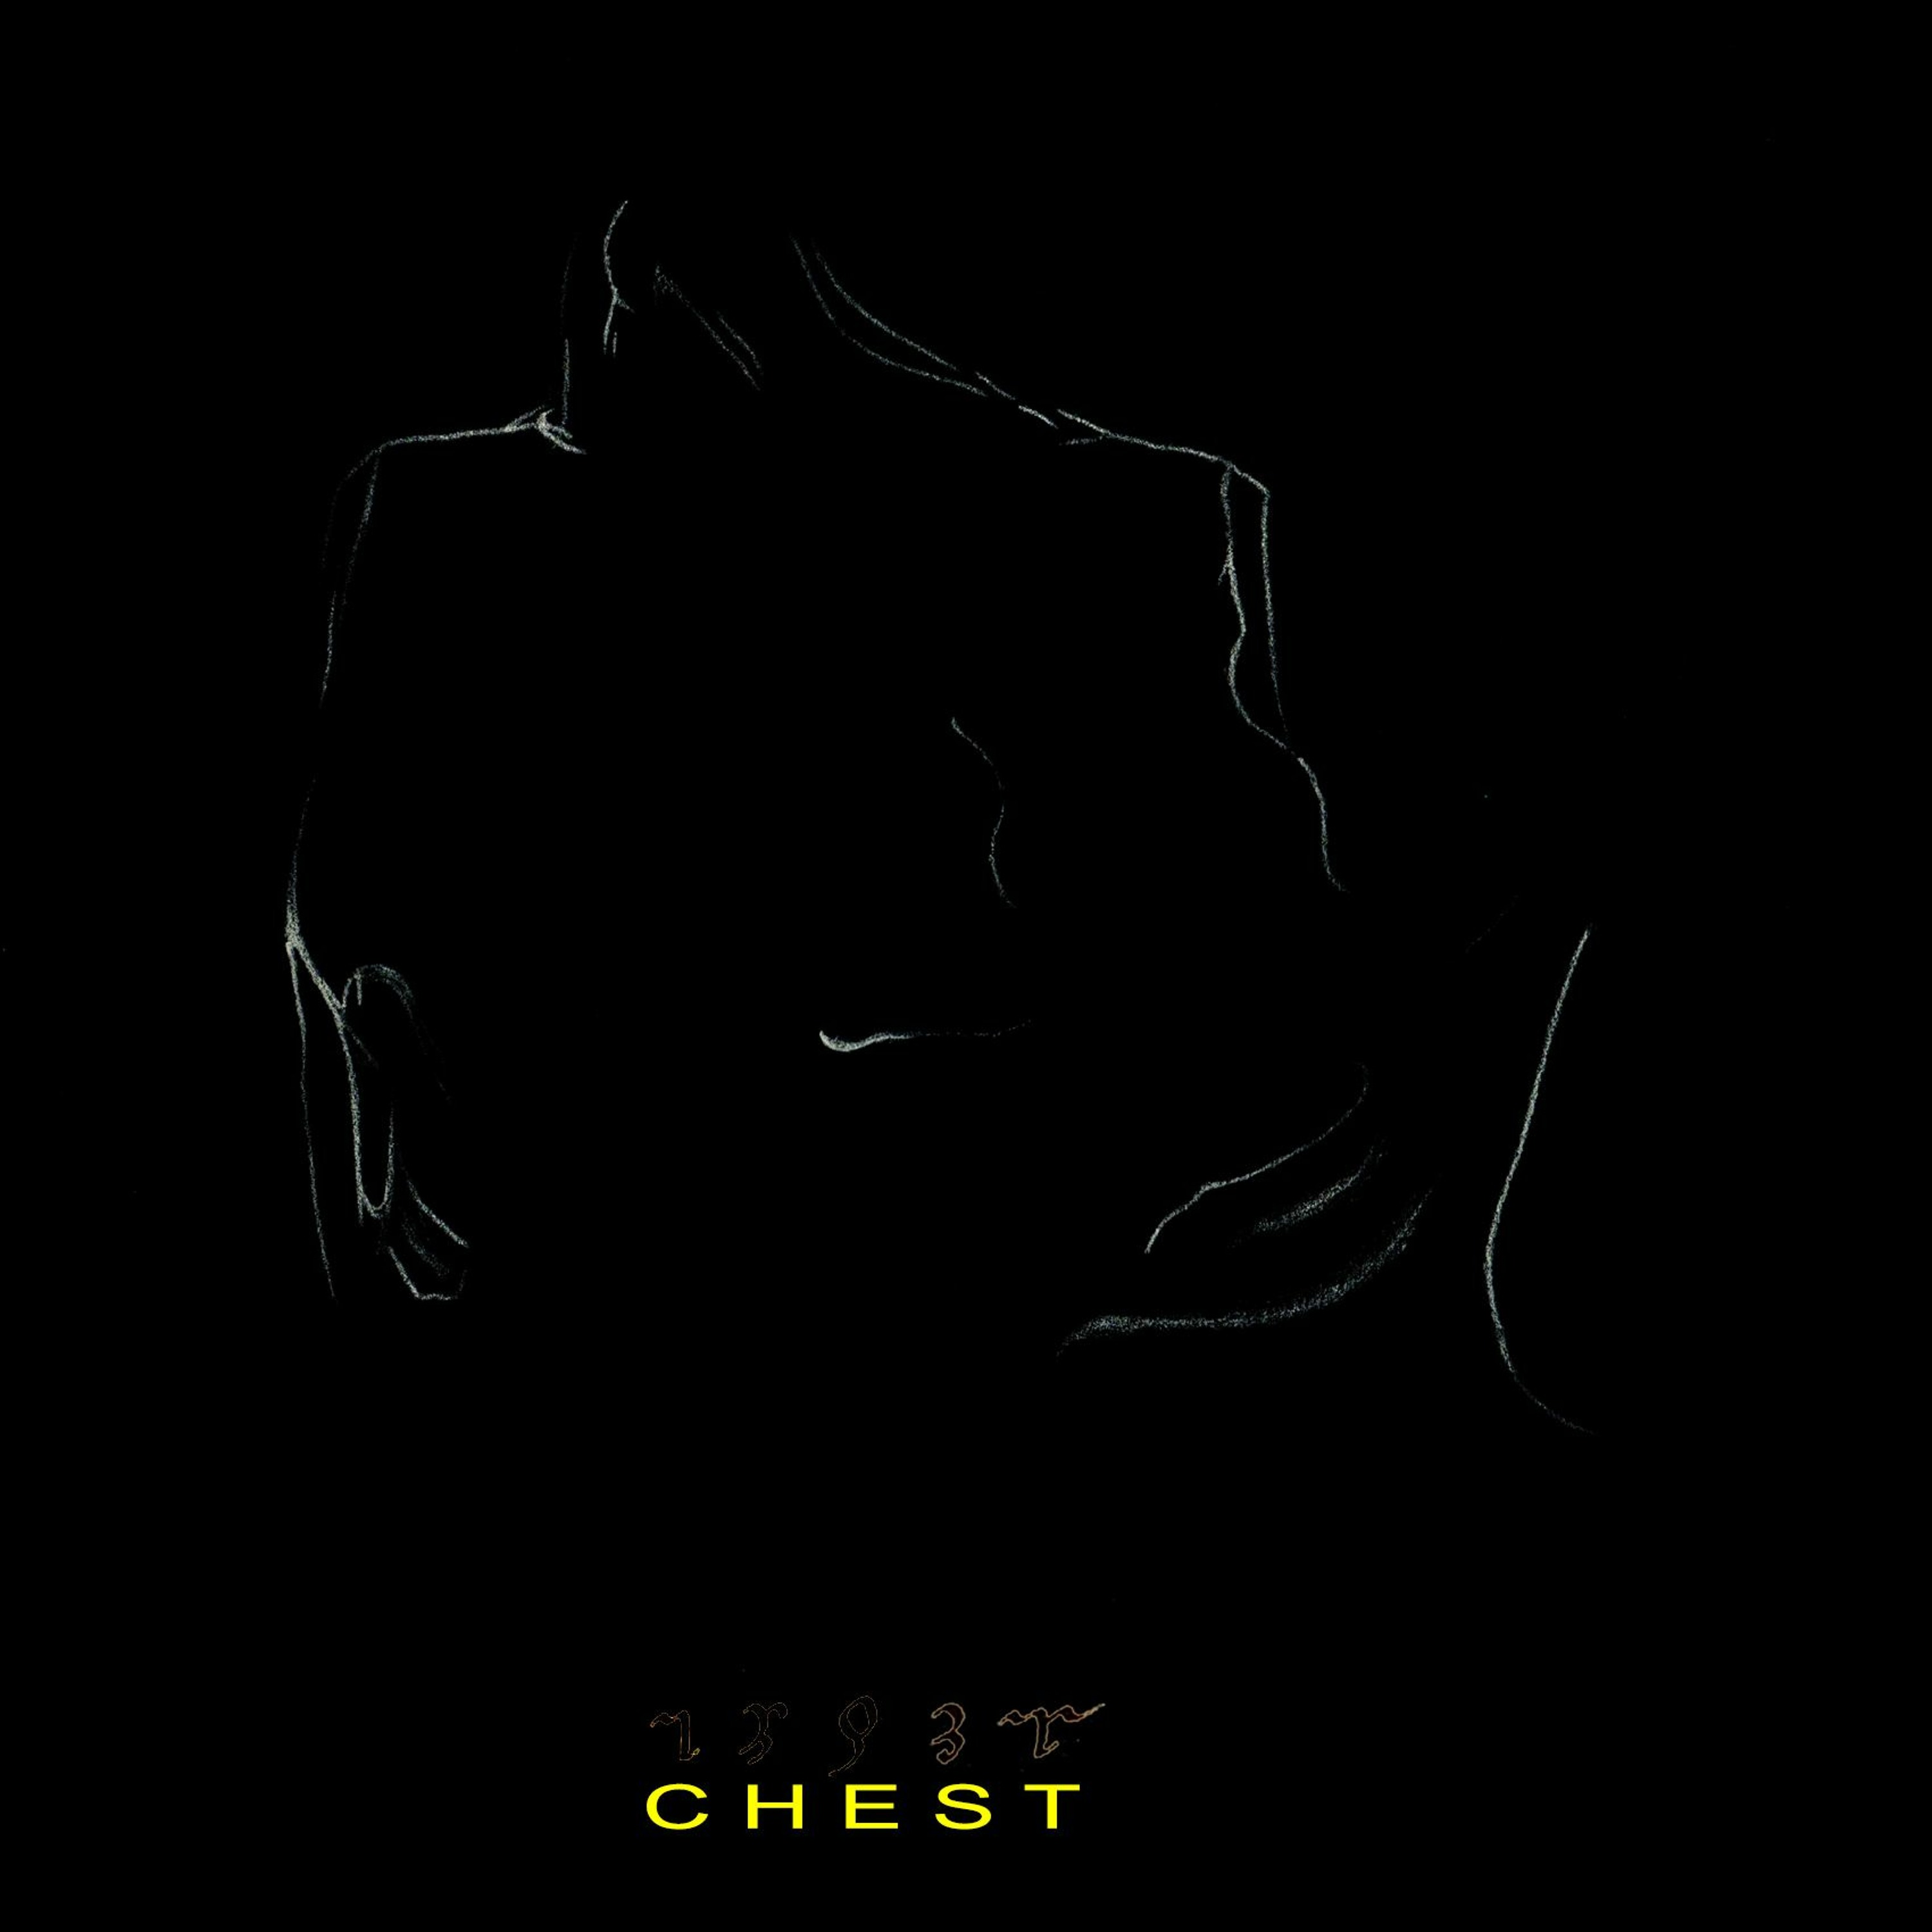 CHEST#29 - - - - - ashes o anagrams